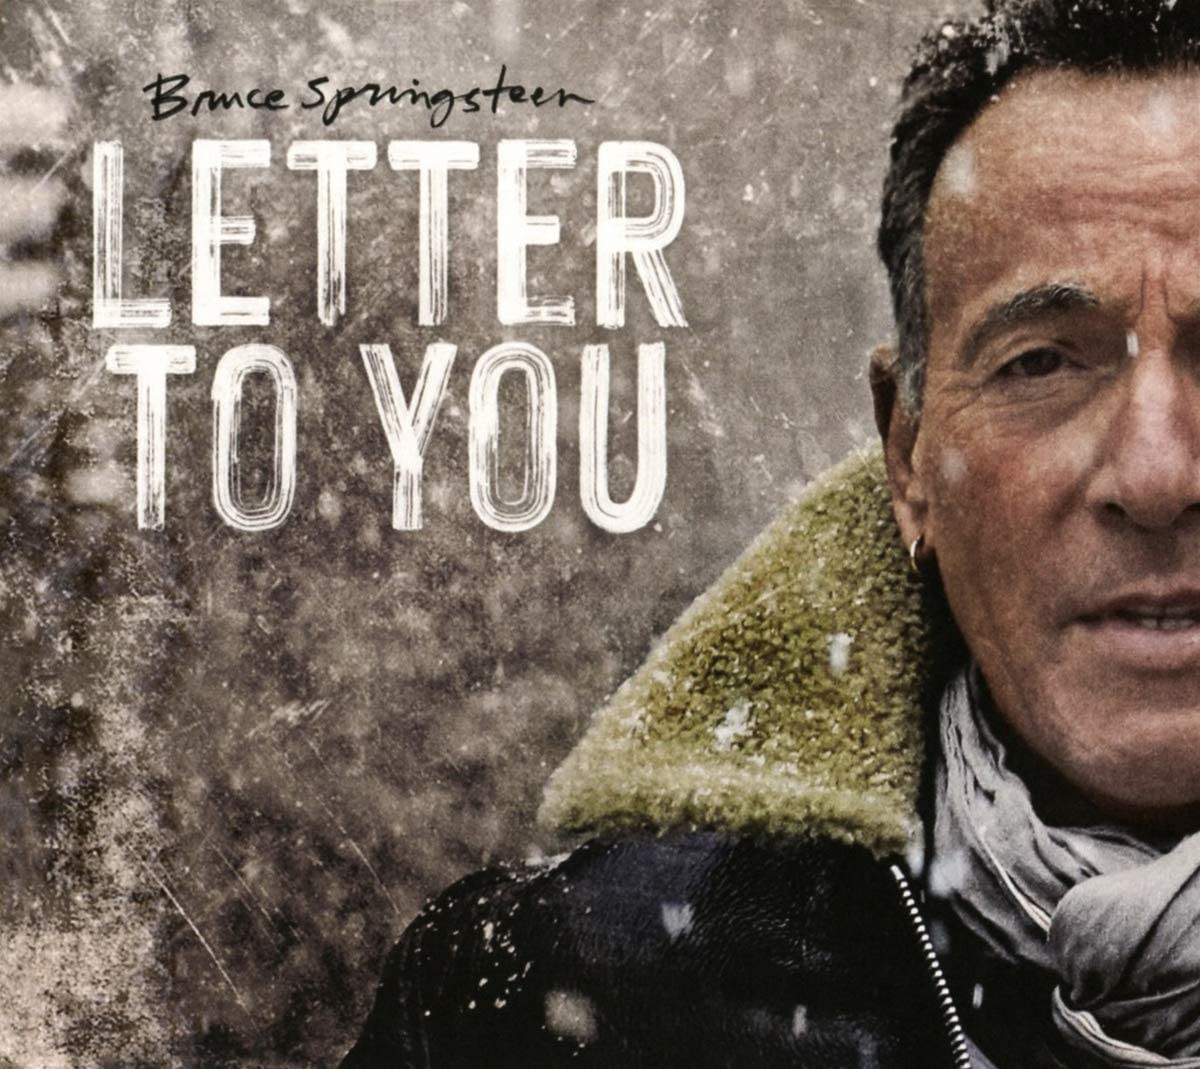 Springsteen, Bruce/Letter To You [CD]